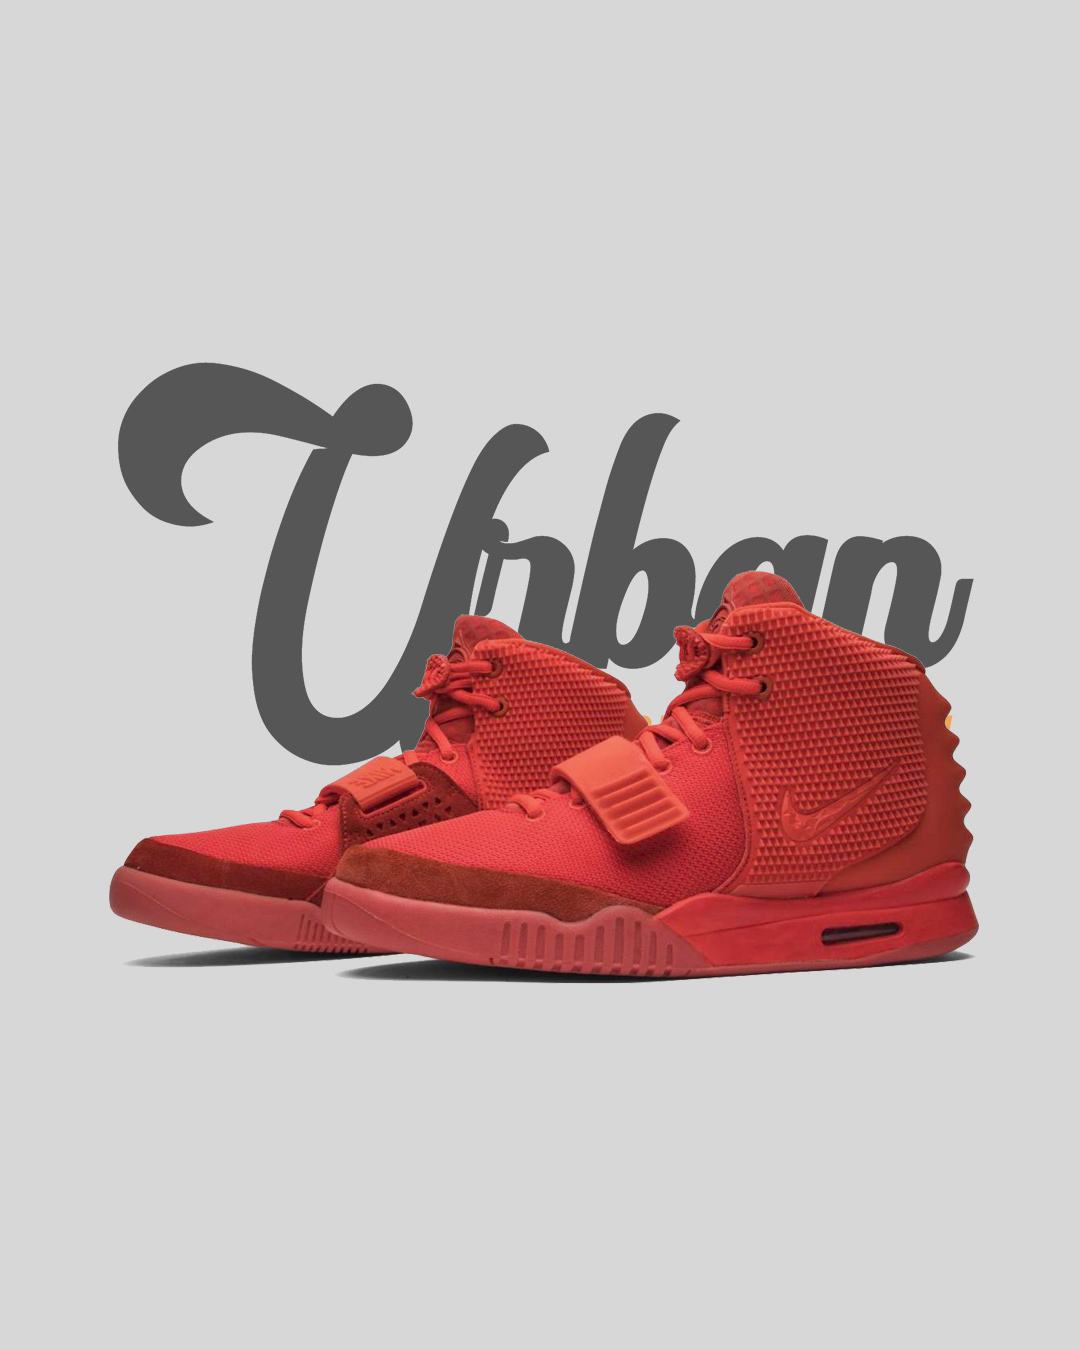 Nike Air 2 Red October – Urban Collection